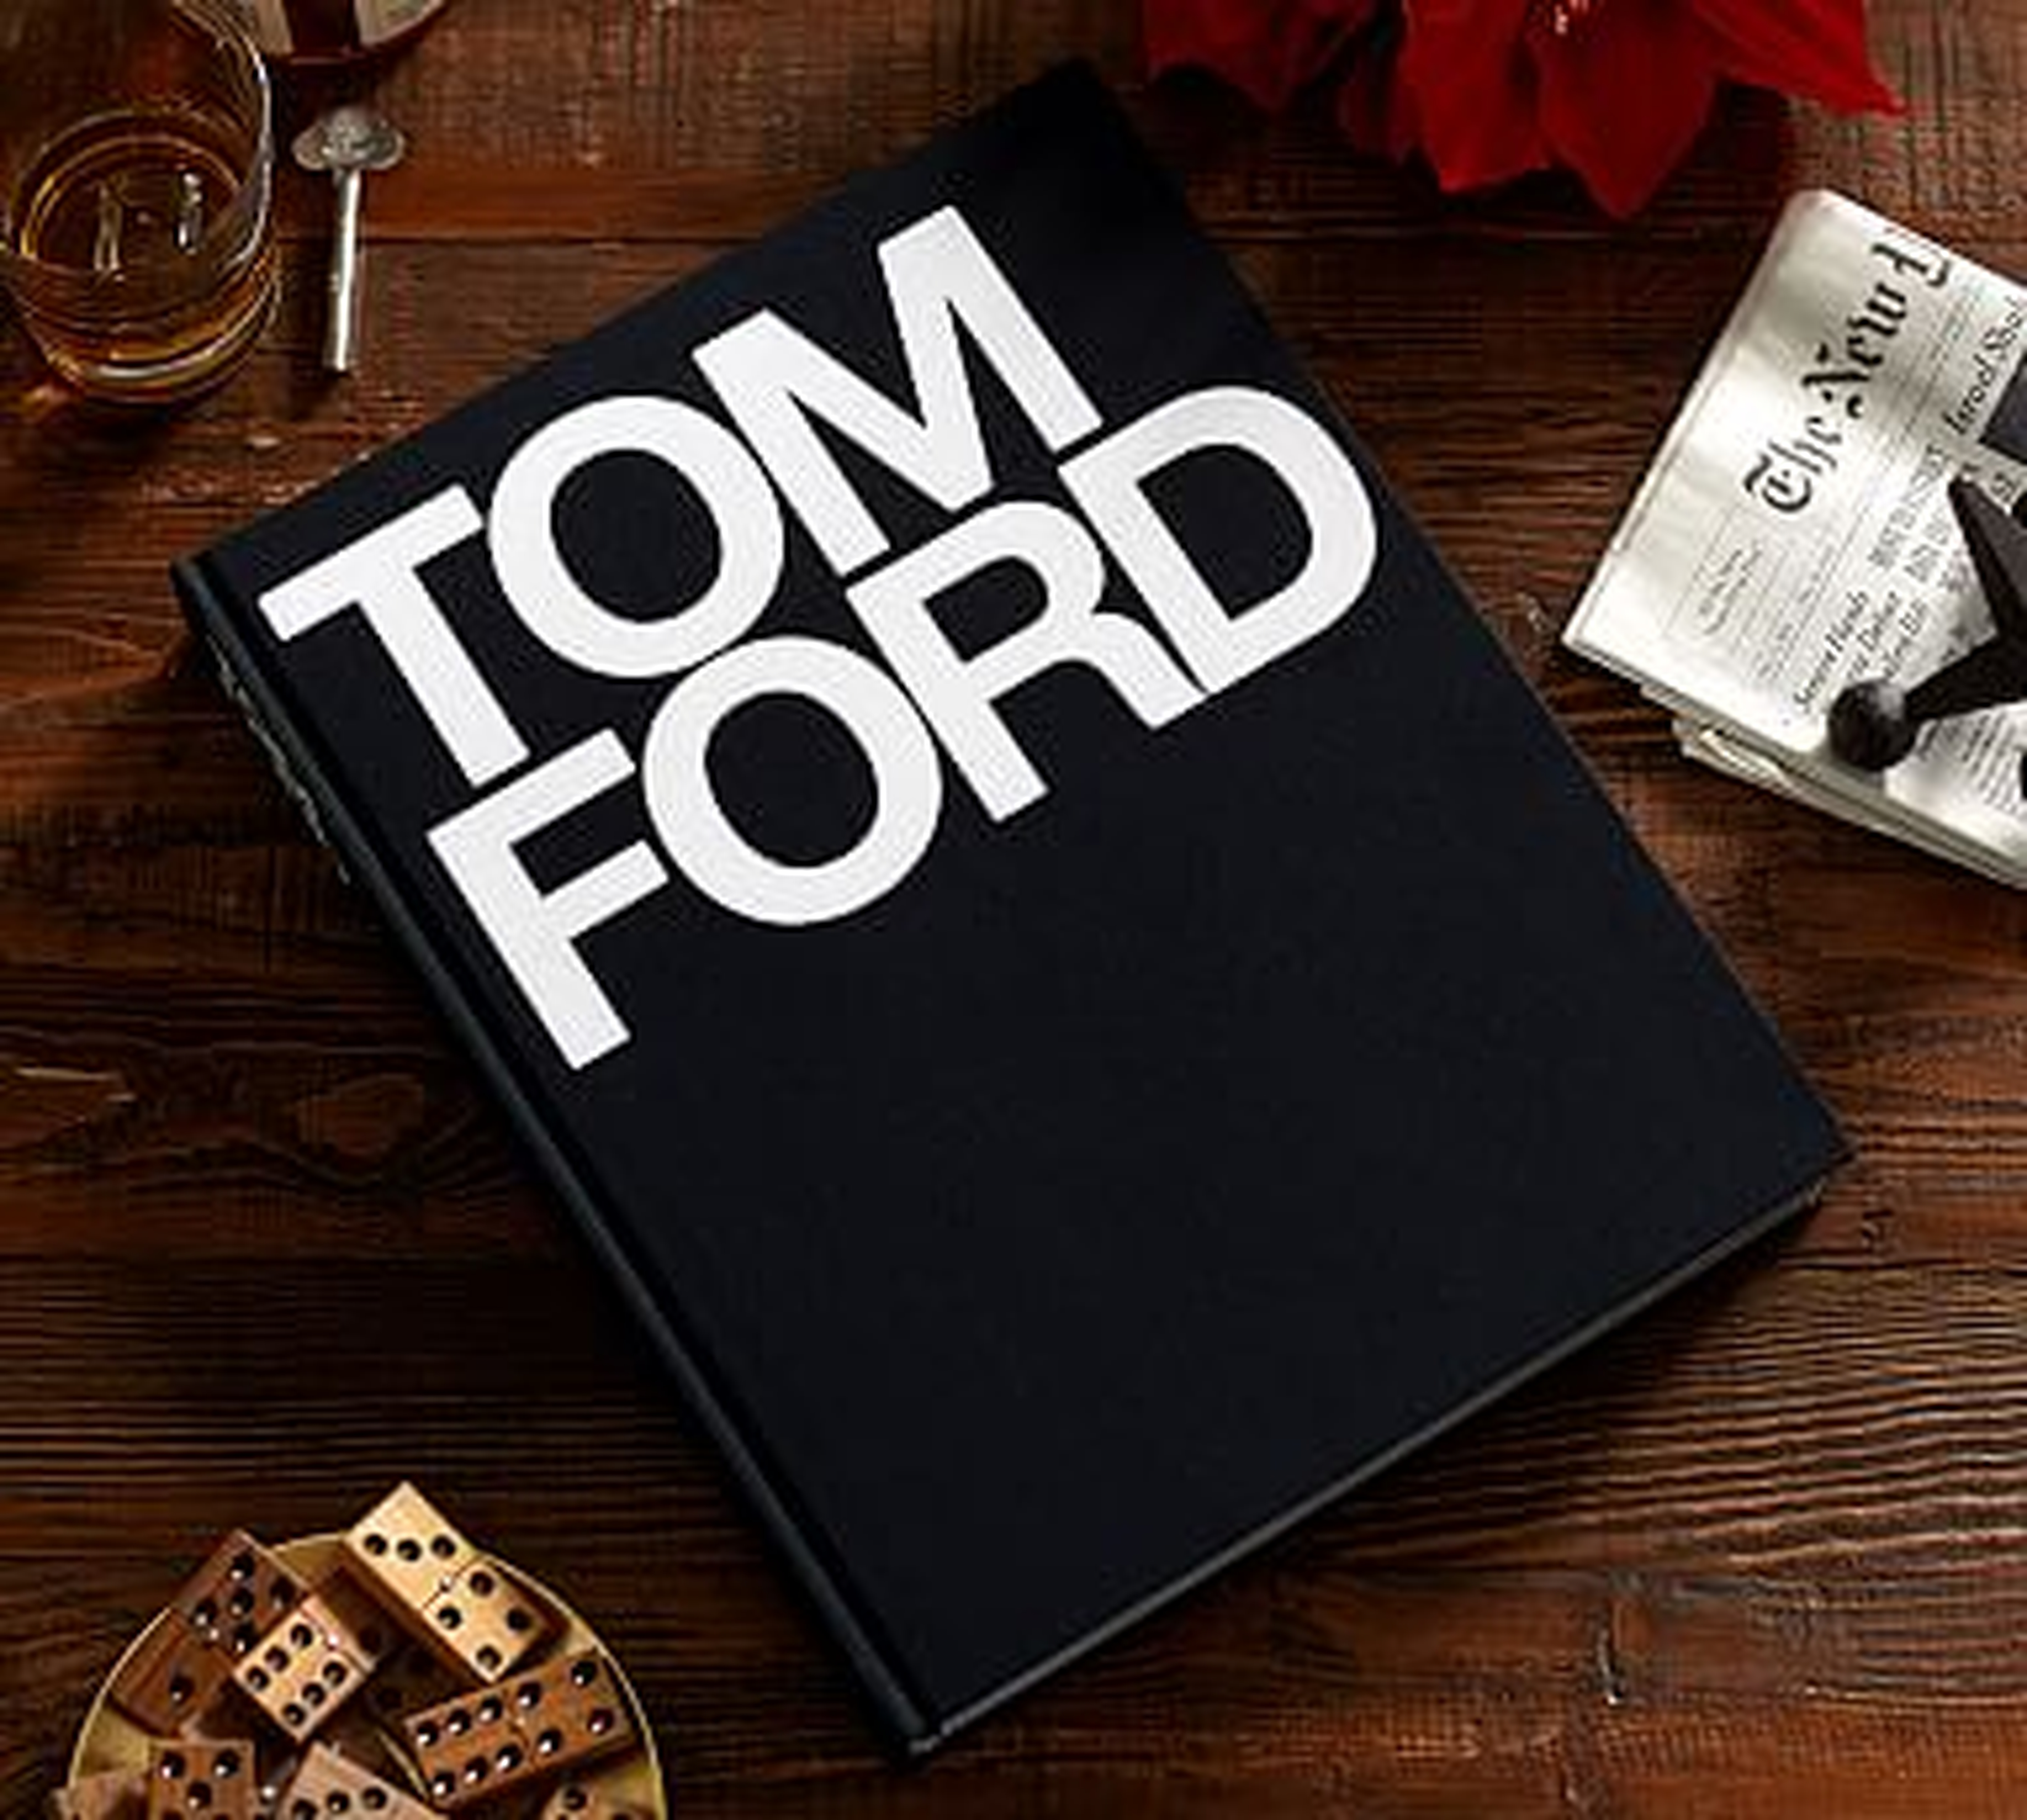 Tom Ford Book - Pottery Barn